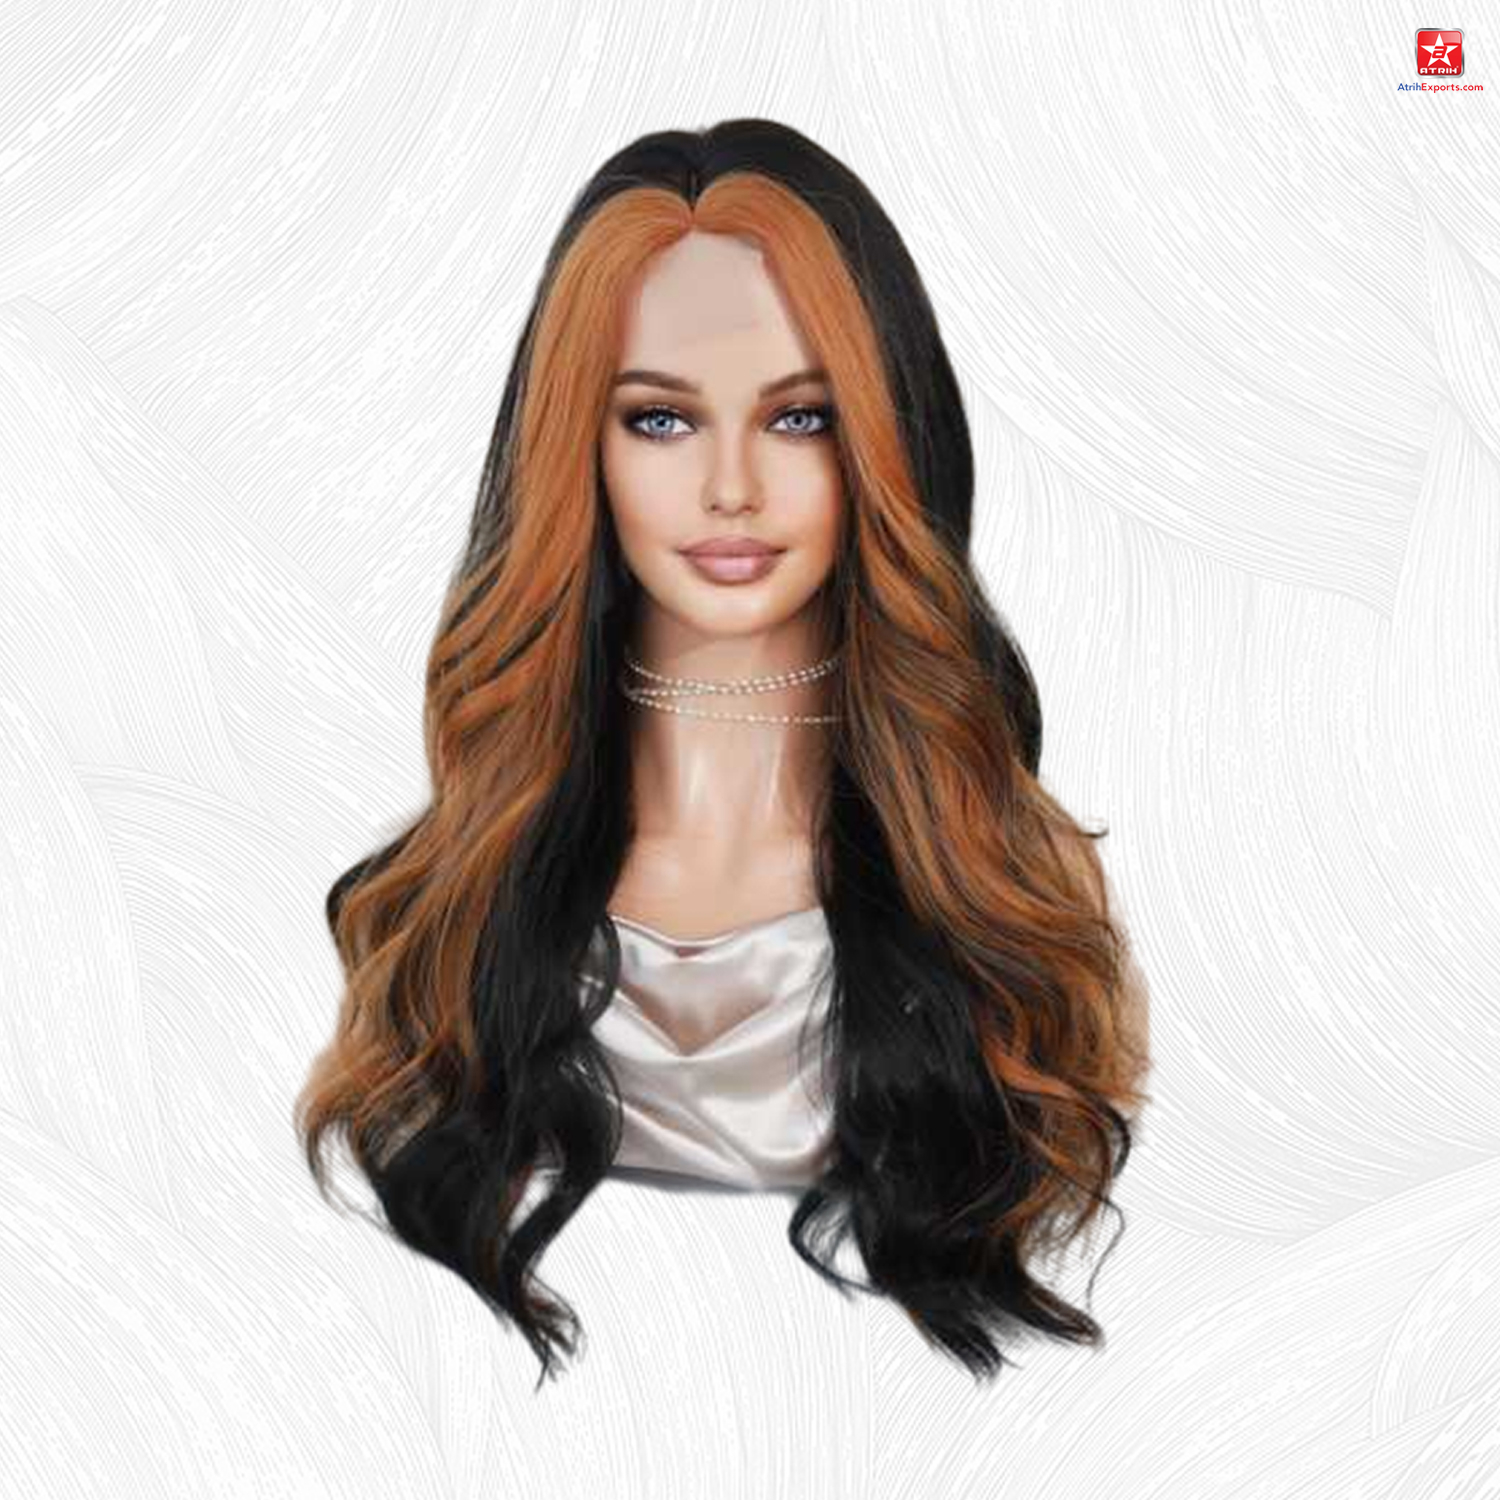 Swiss Lace Wigs Virgin Human Hair Women's Natural Black Orange Colour Ticked Medium Parted Big Wave Long Wig